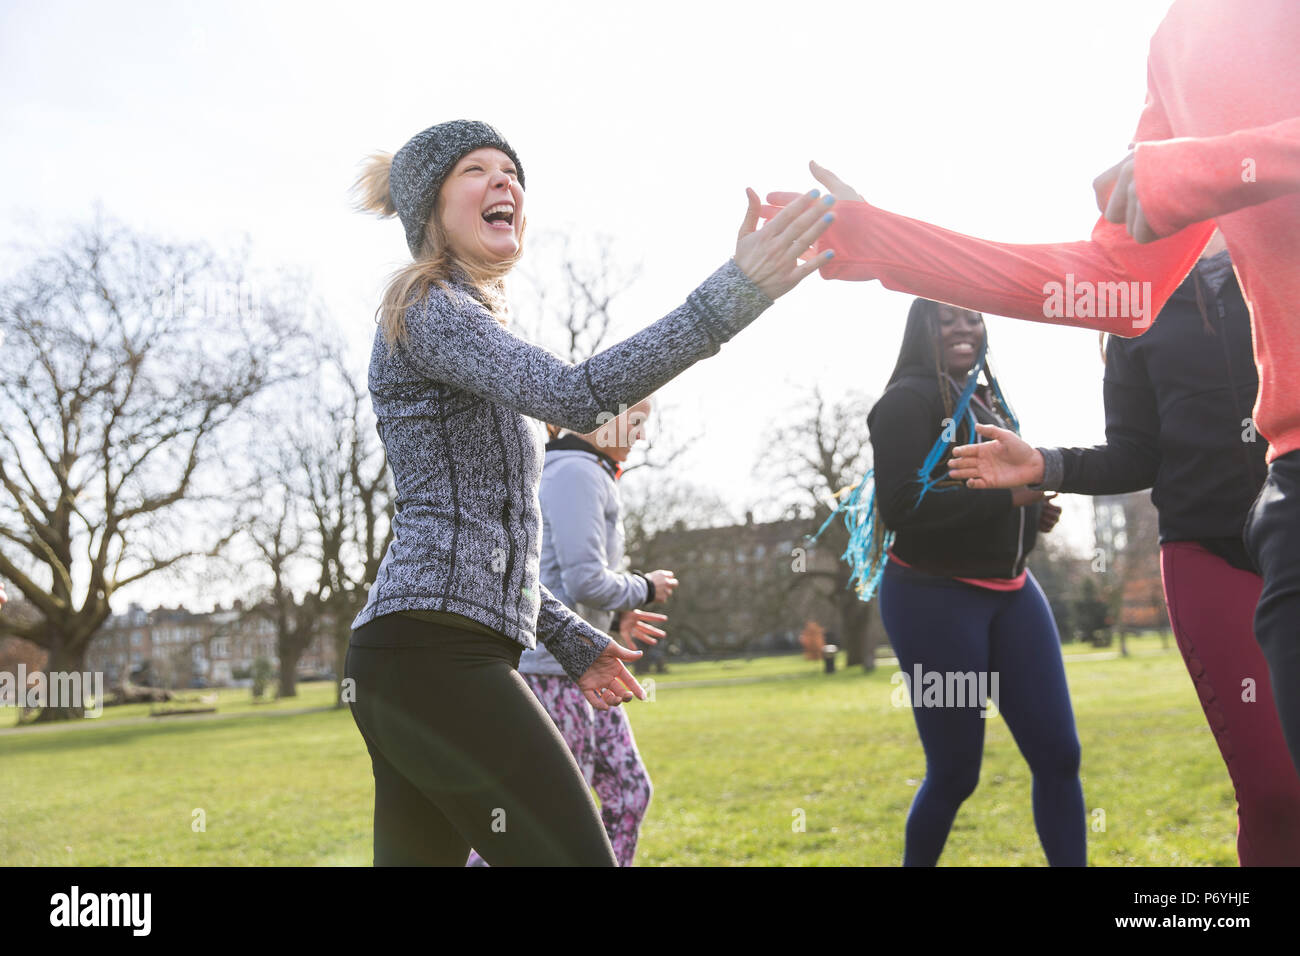 Enthusiastic woman high-fiving classmate, exercising in sunny park Stock Photo